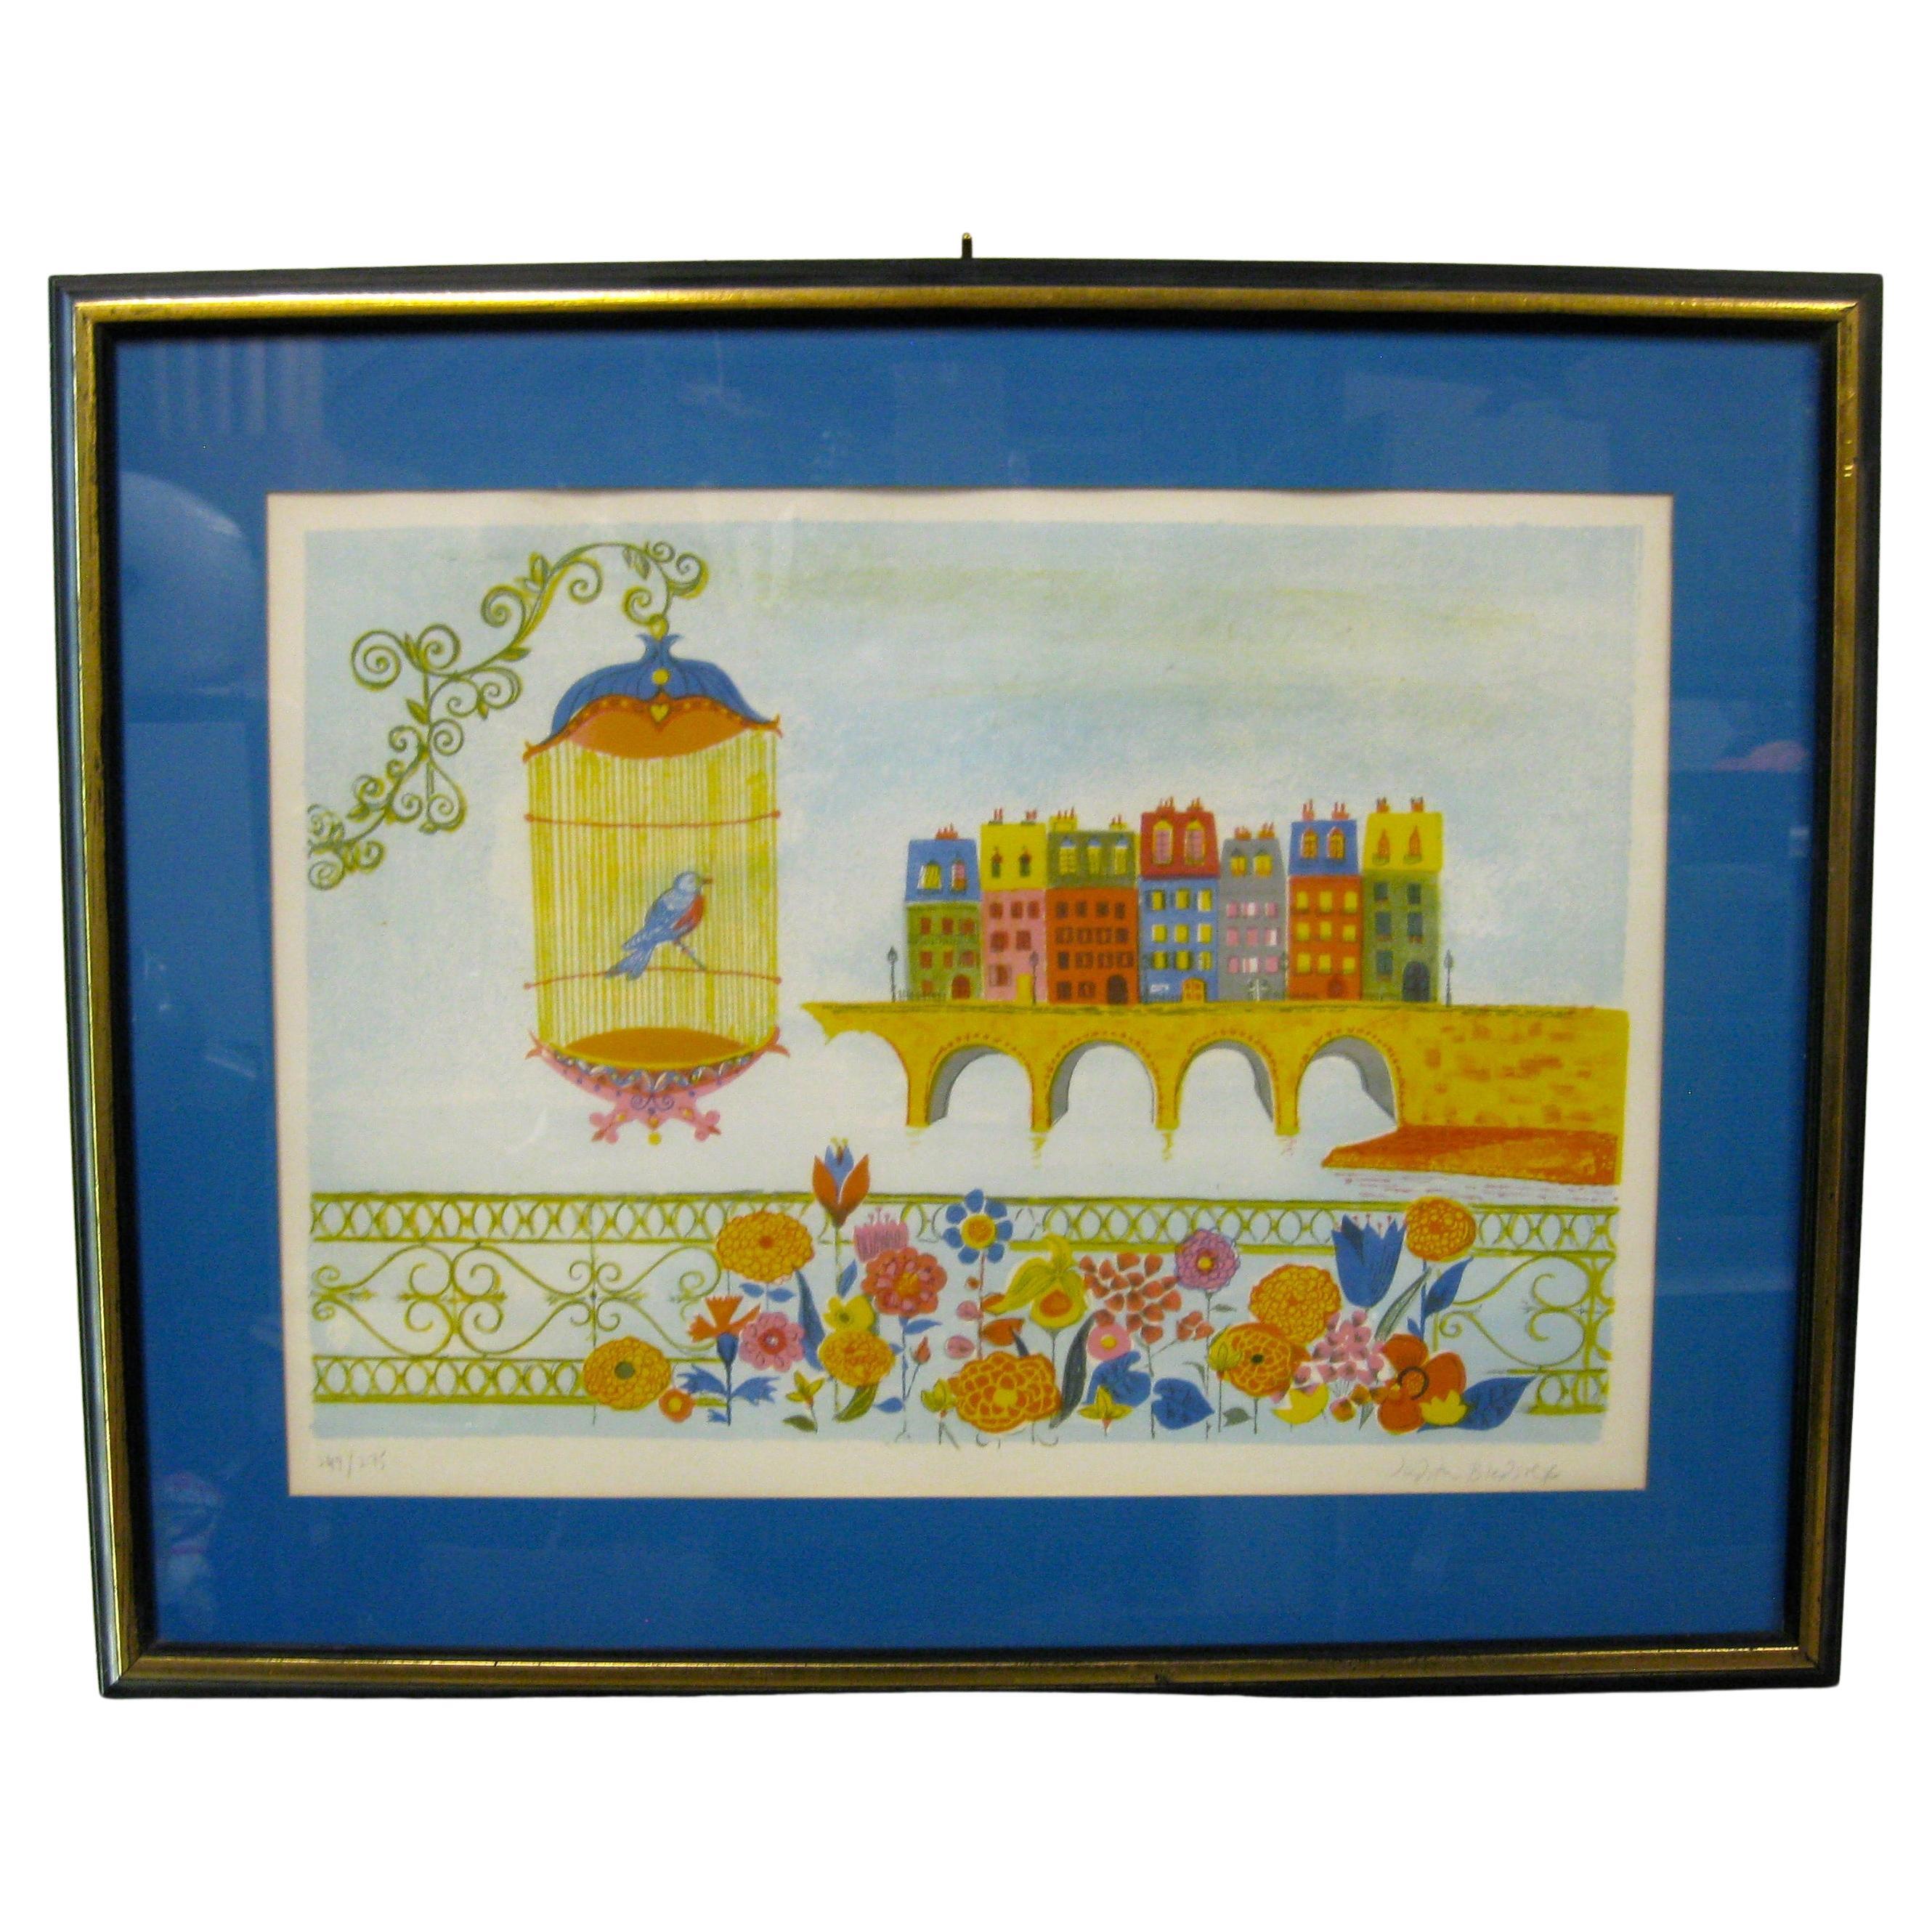 1970's Judith Bledsoe Whimsical Cityscape W/Bird Lithograph Signed & Numbered For Sale